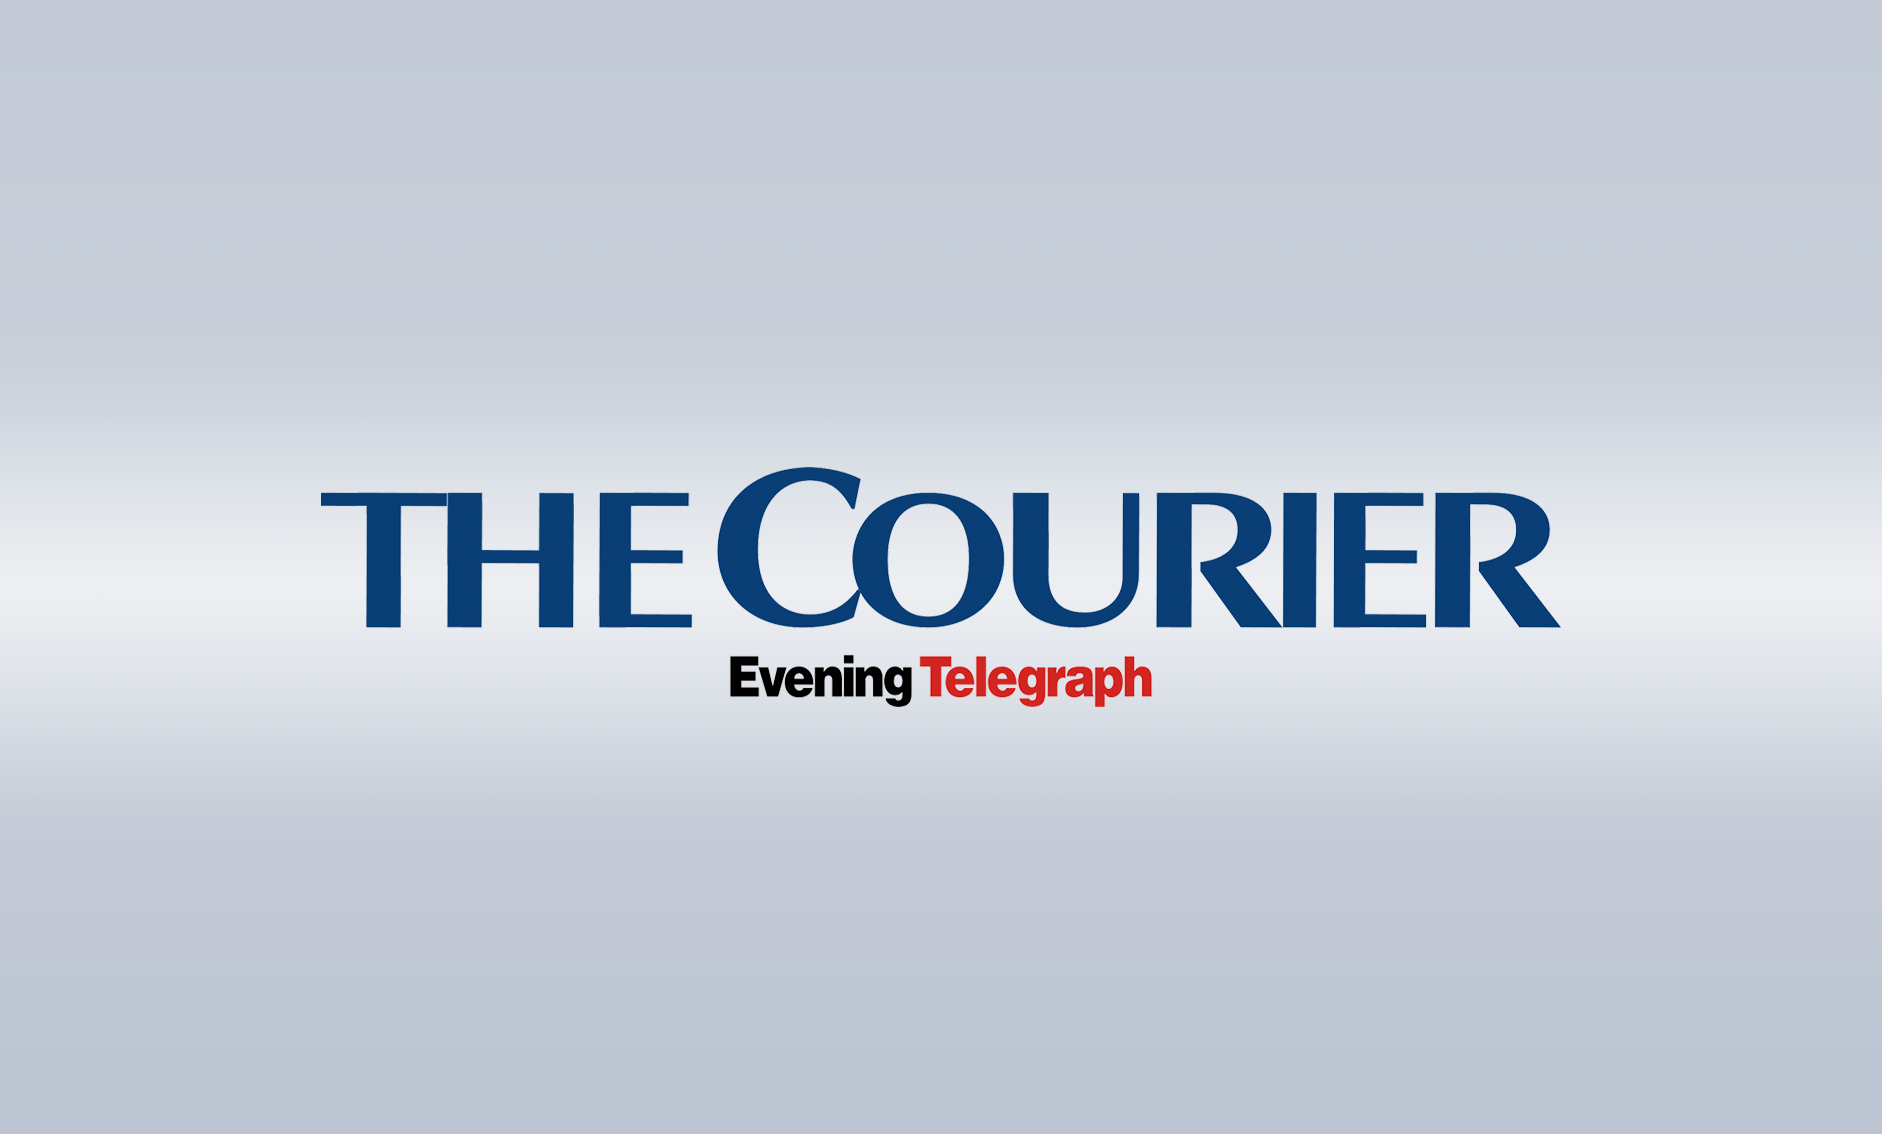 Coming up in Wednesday’s Courier